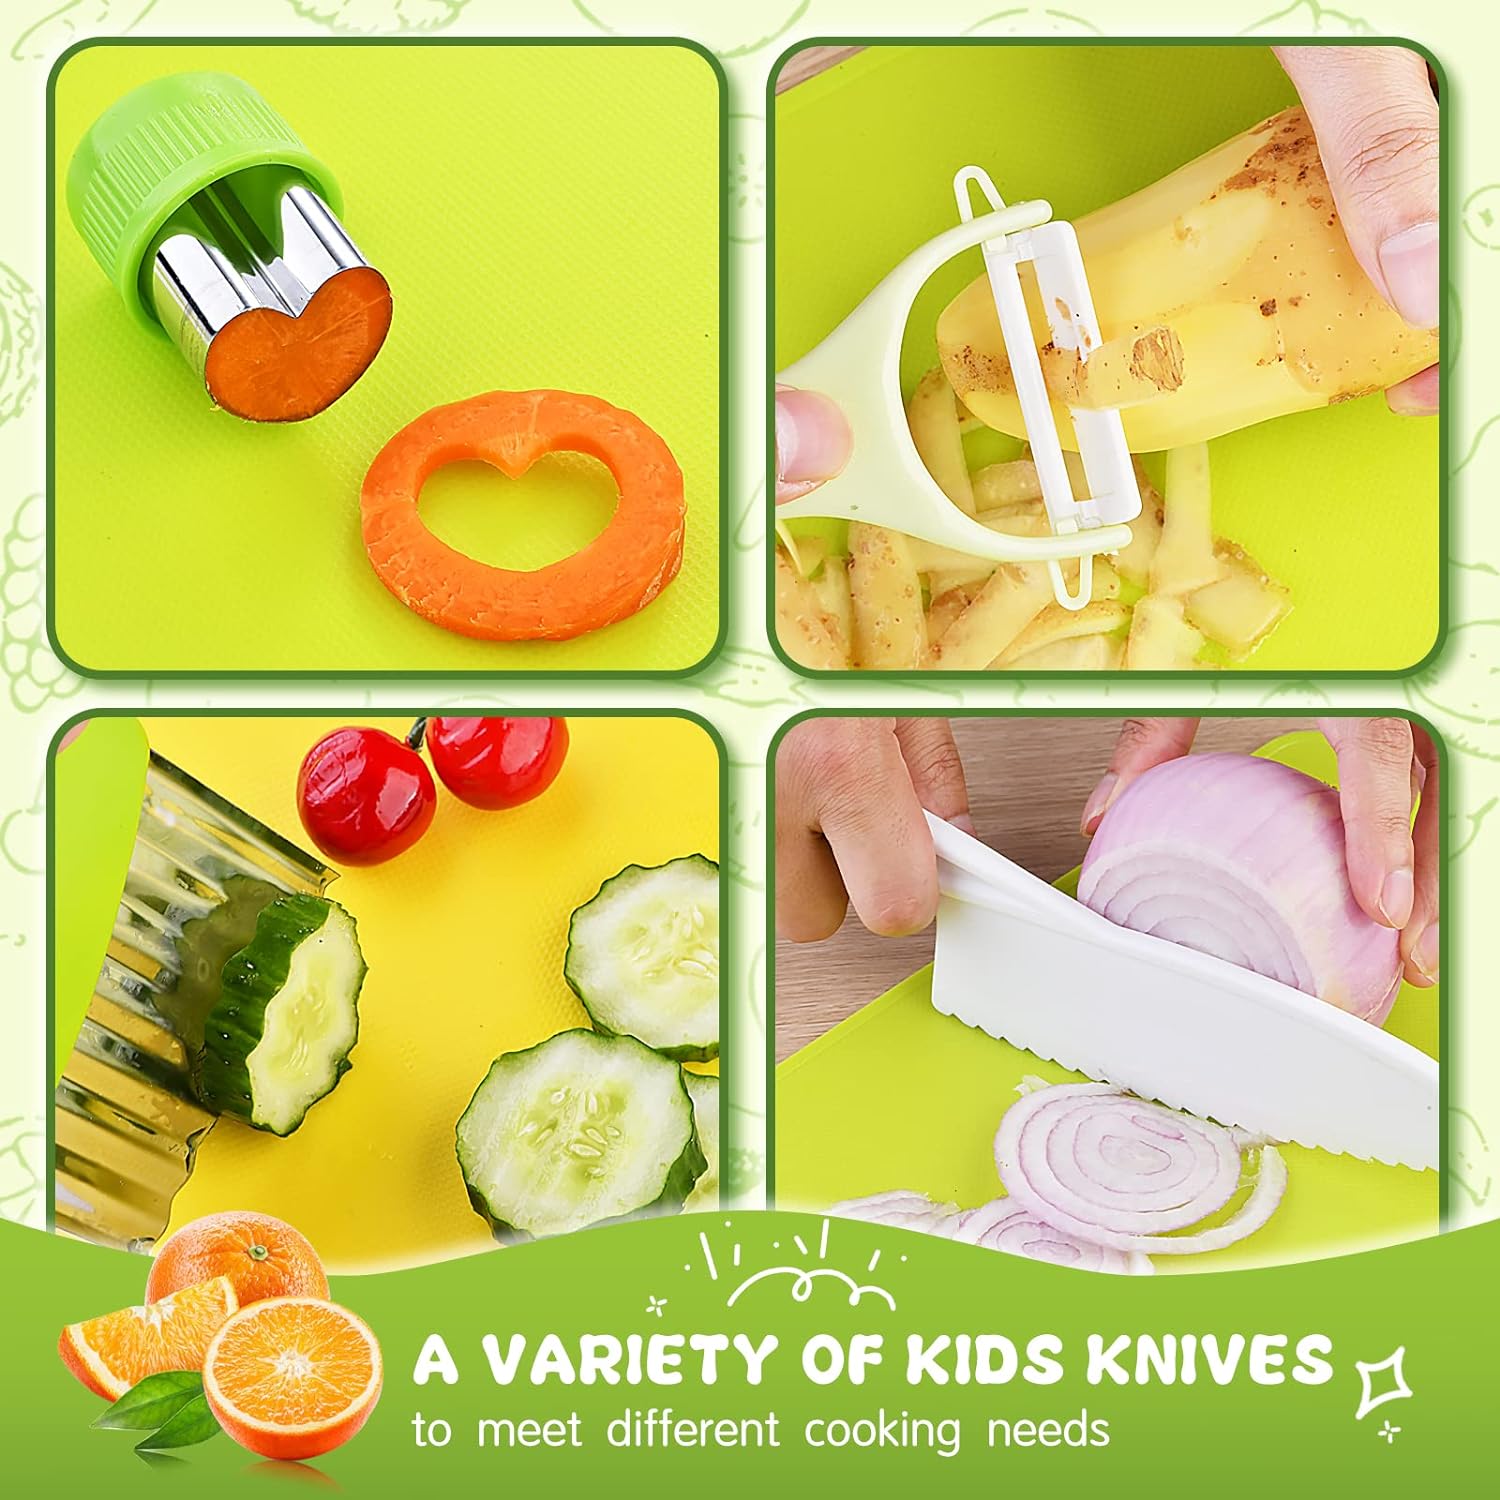 Yeeammk 13 Pieces Montessori Kitchen tools for Toddlers-Kids Cooking sets Real-Toddler Safe Knives Set for Real Cooking with Plastic Toddler Safe Knives Crinkle Cutter Kids Cutting Board